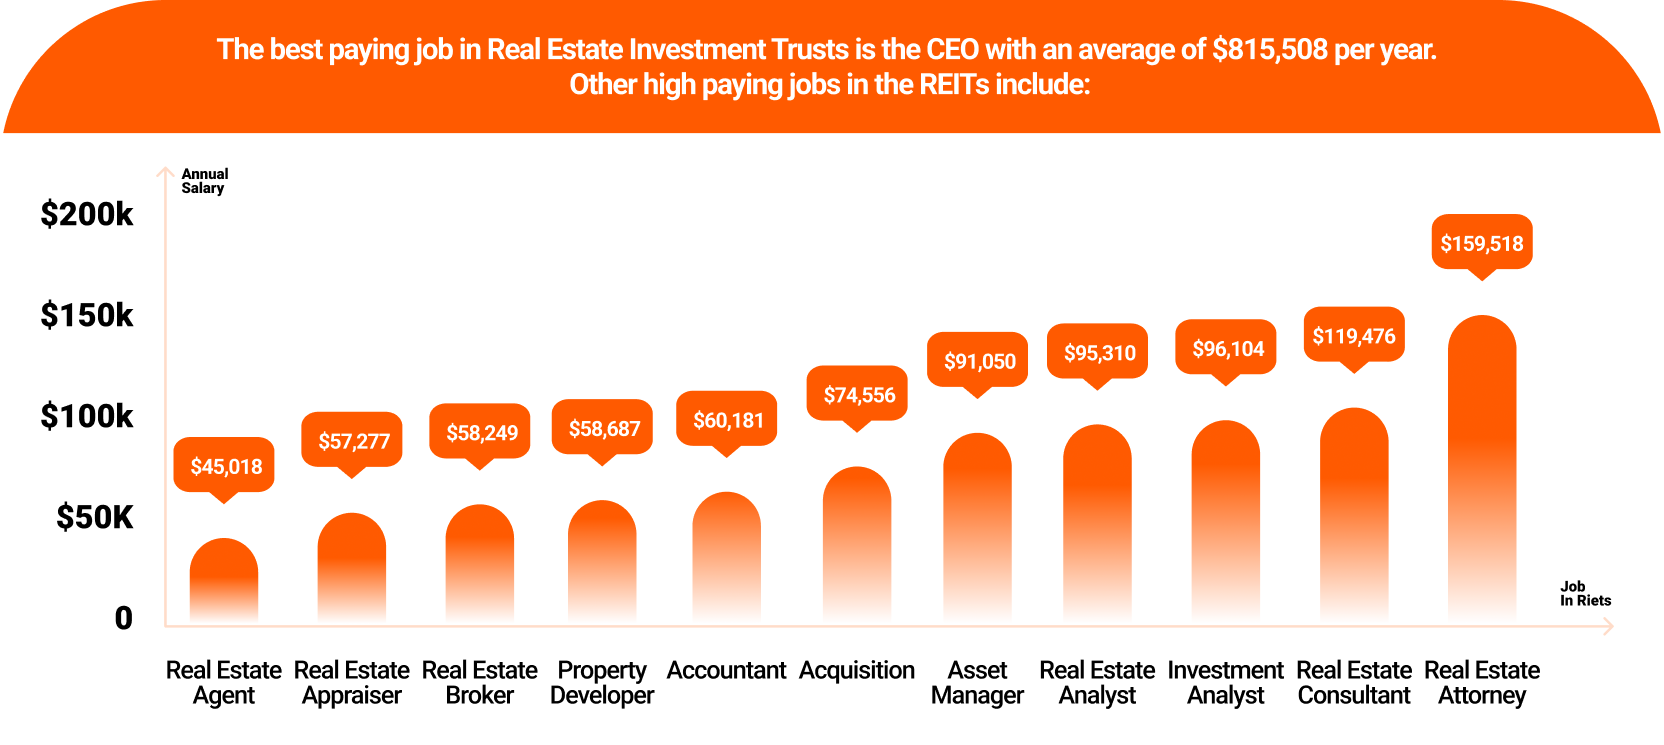 The best paying jobs in real estate investment trusts